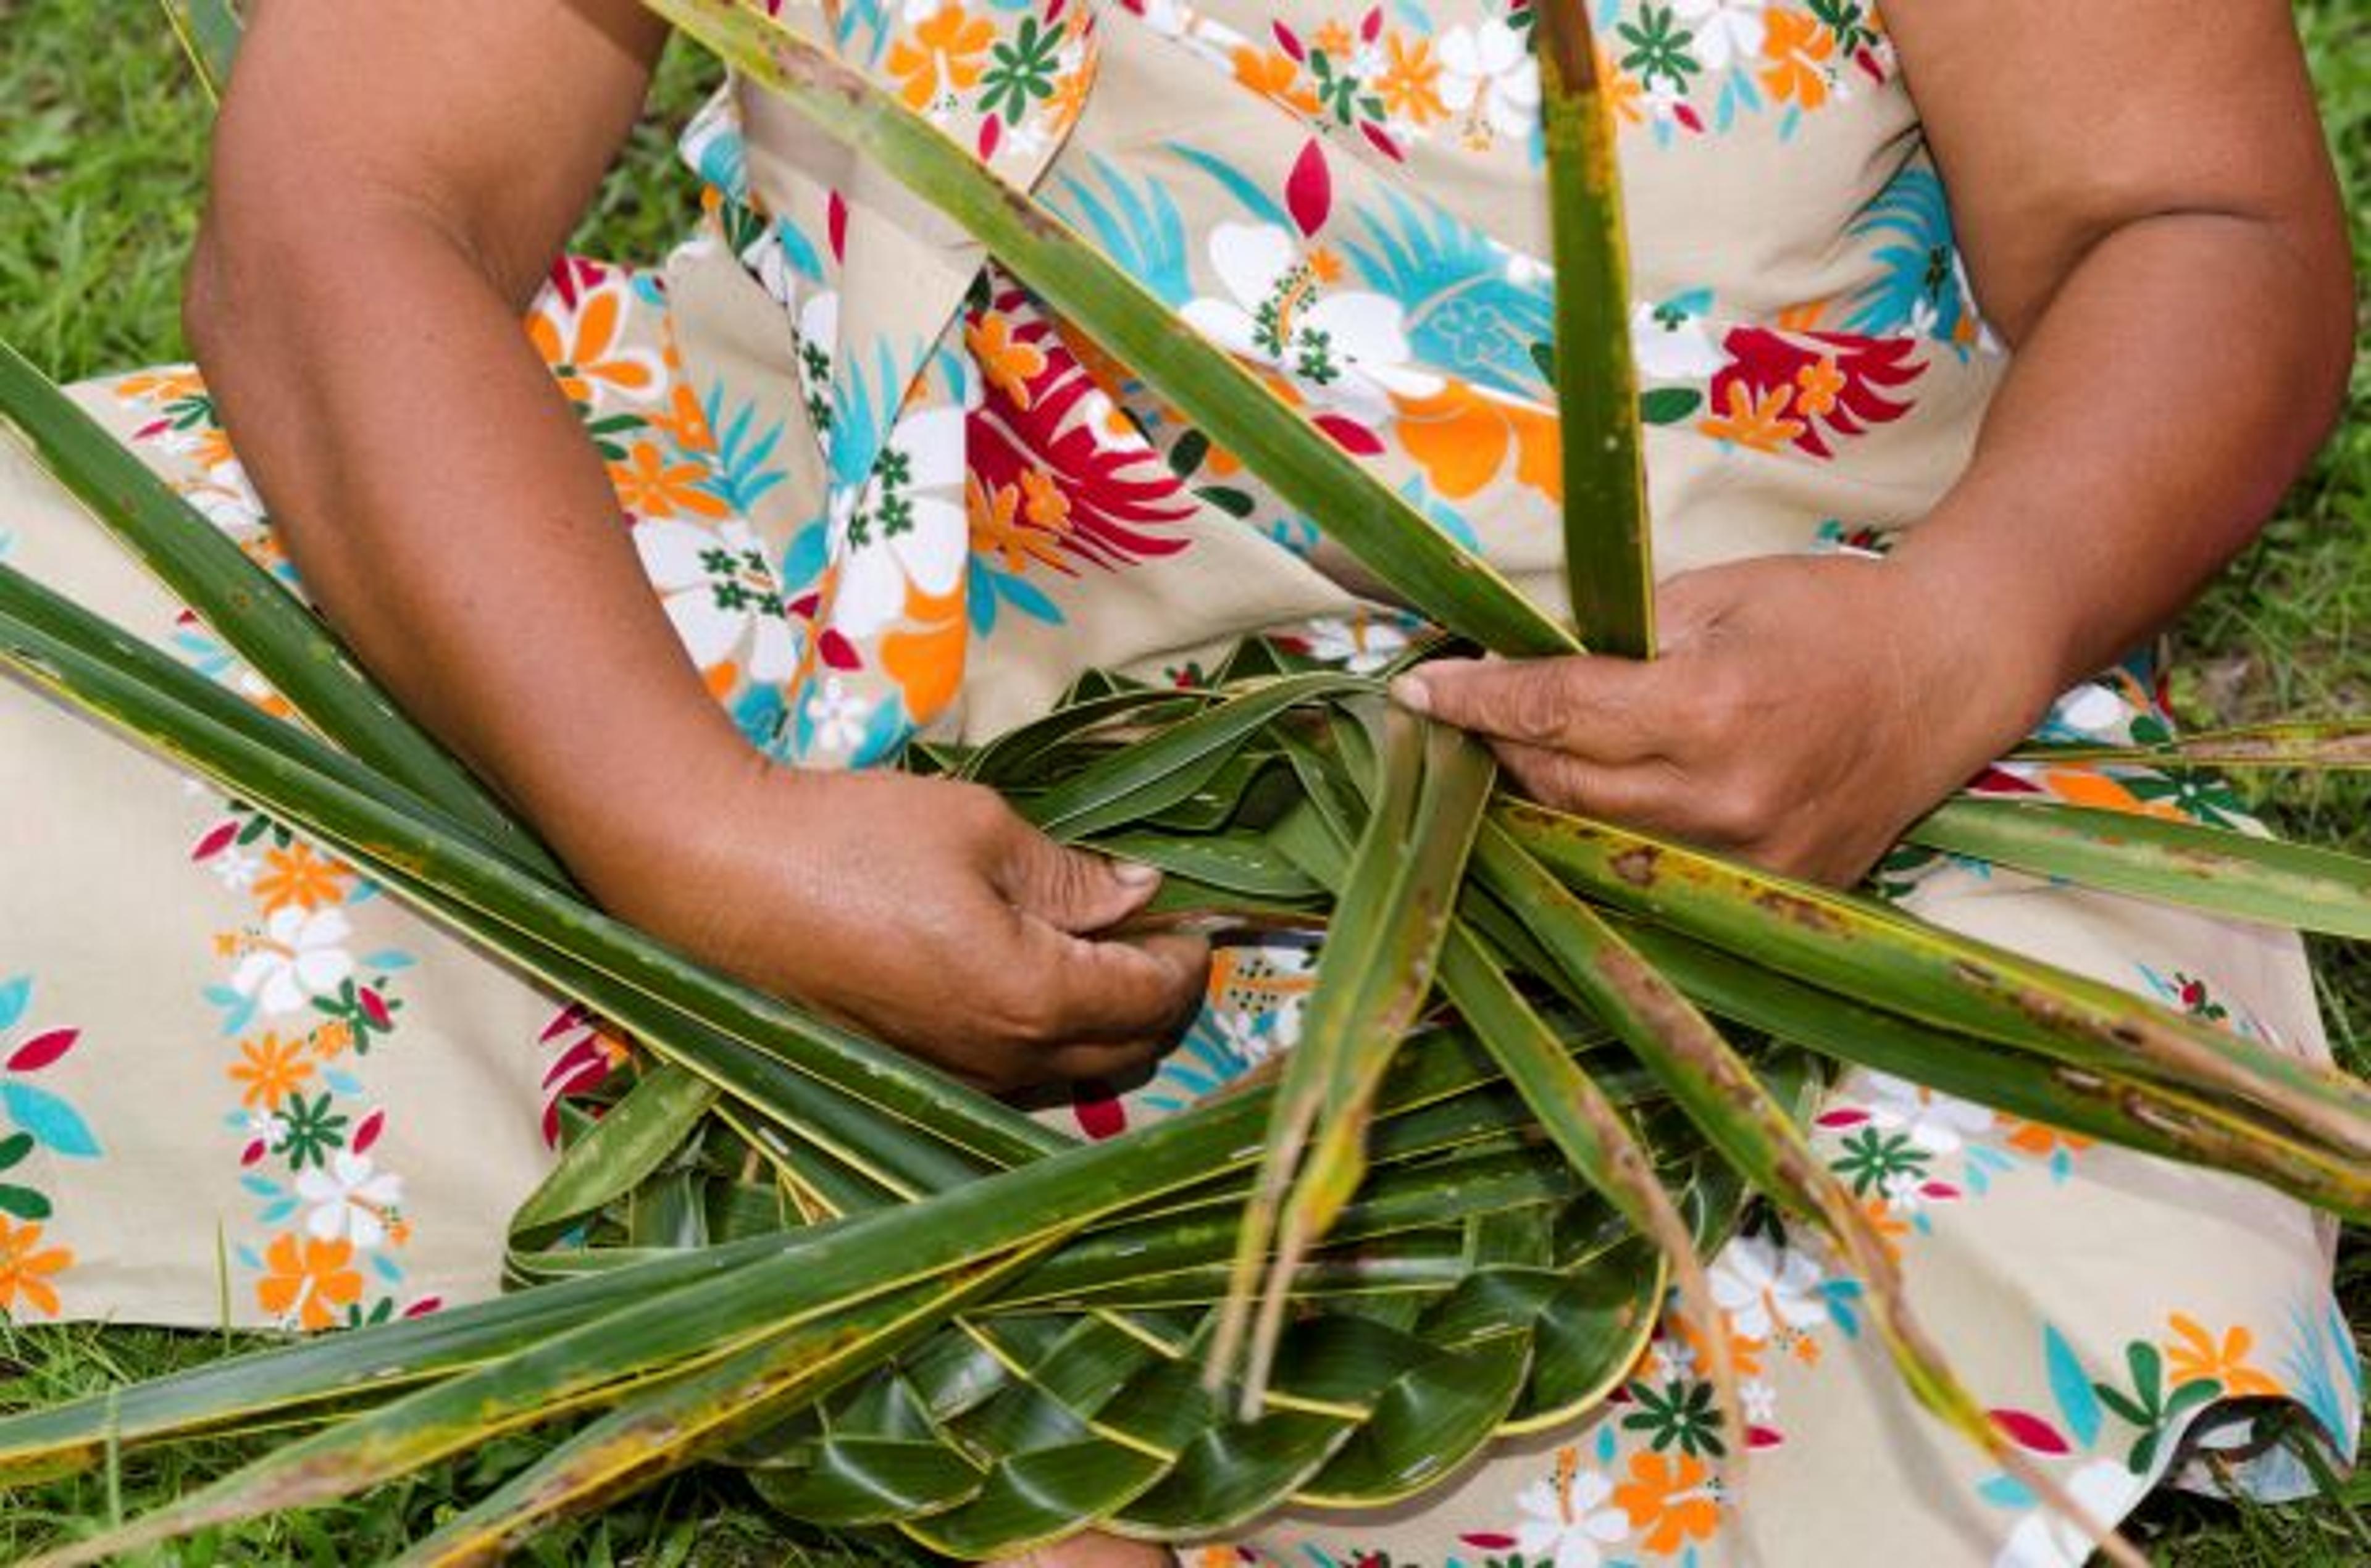 A recently launched Pacific health plan named Ola Manuia found that Pasifika frequently populate 'high deprivation' areas where almost a quarter of the community cannot afford their everyday needs.